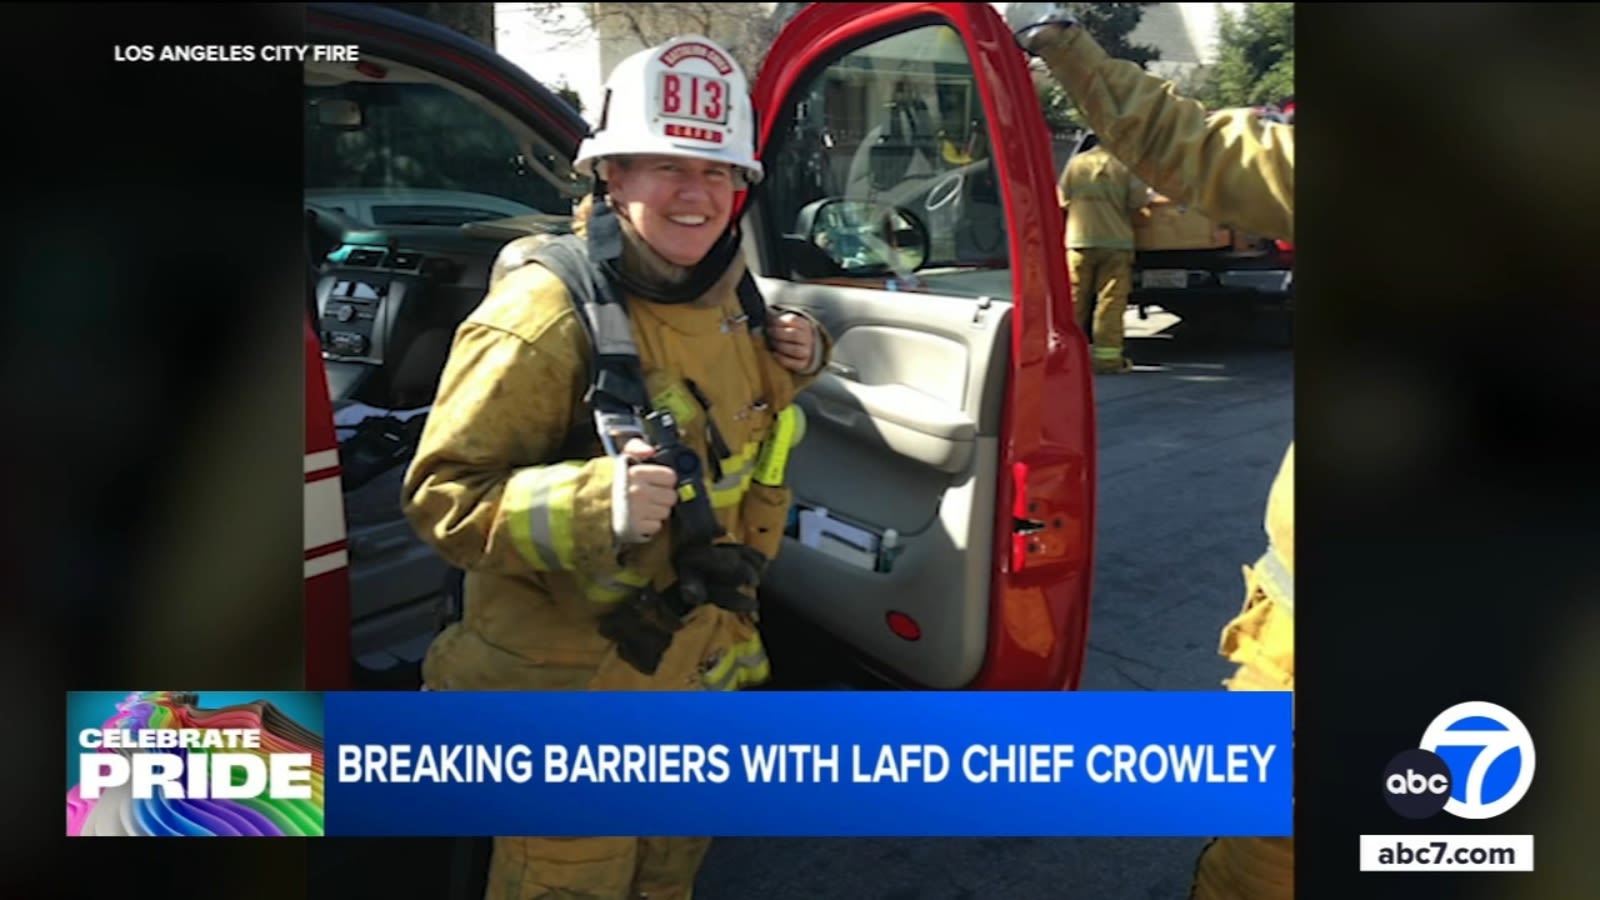 LAFD Chief Kristin Crowley reflects on breaking barriers and acceptance ahead of Pride Parade